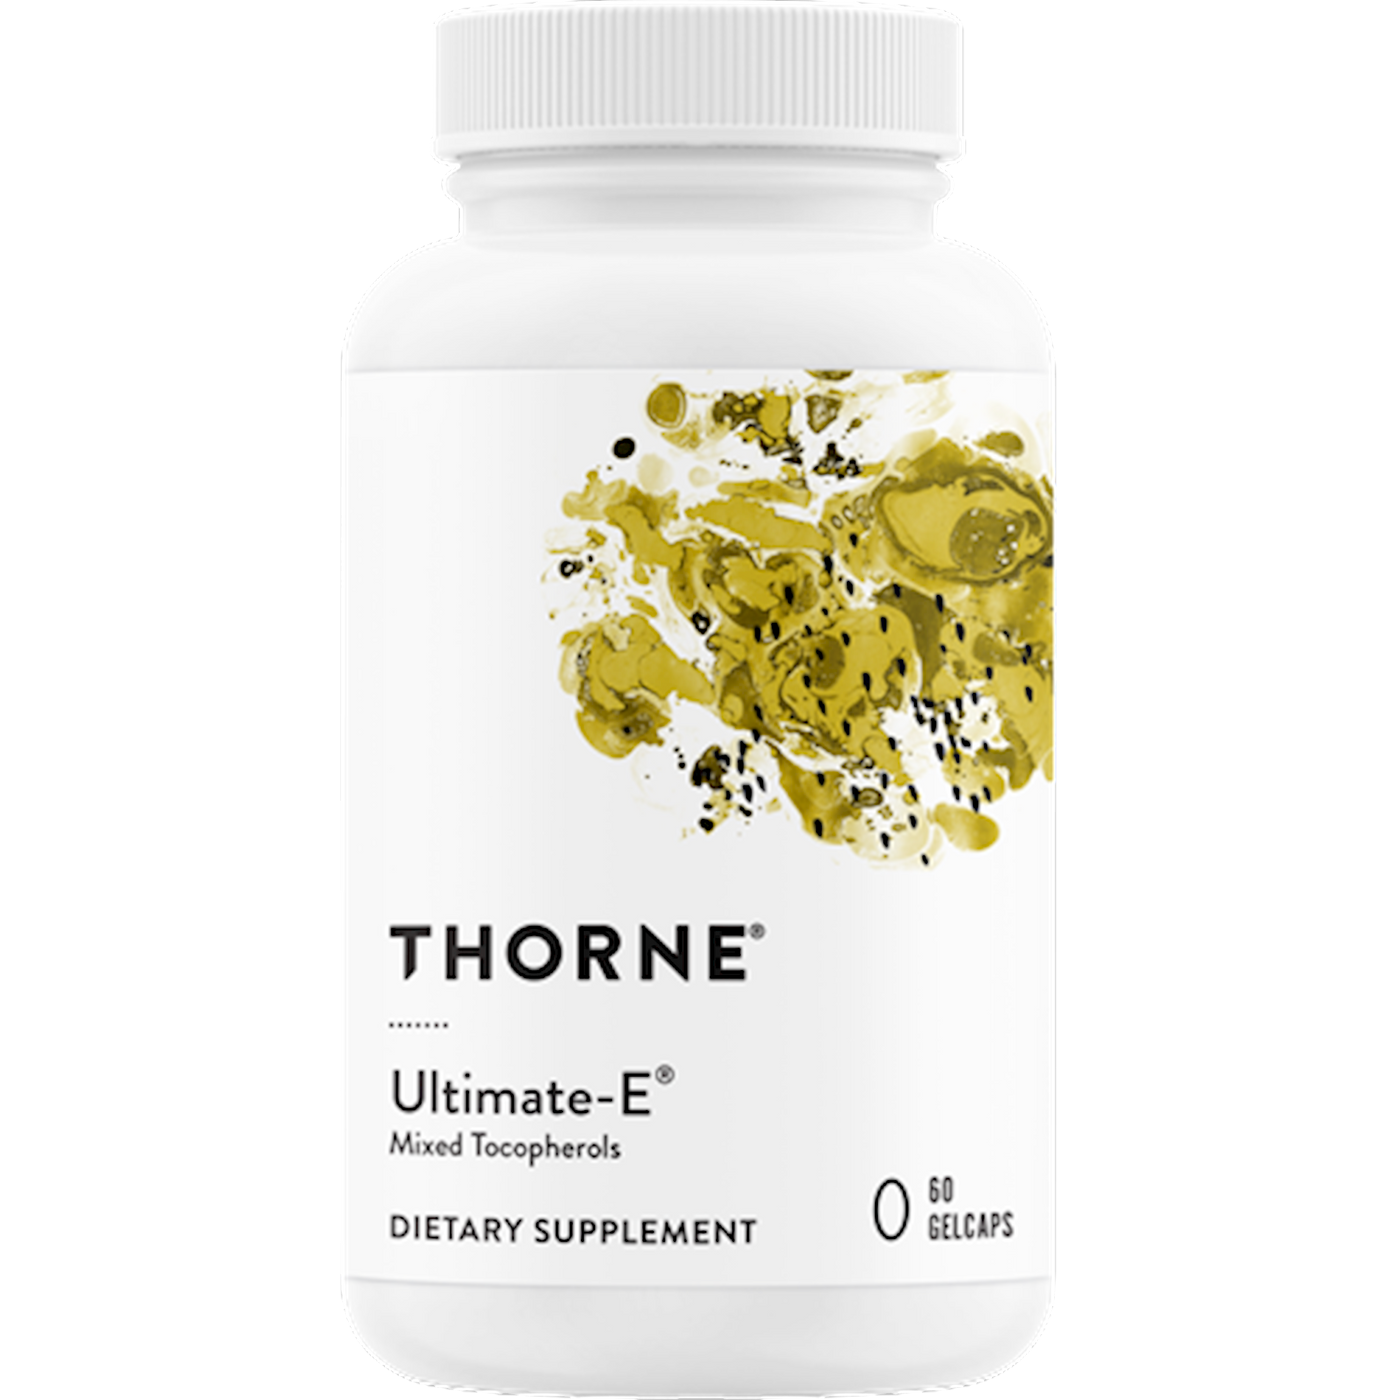 Ultimate-E 60 gelcaps Curated Wellness